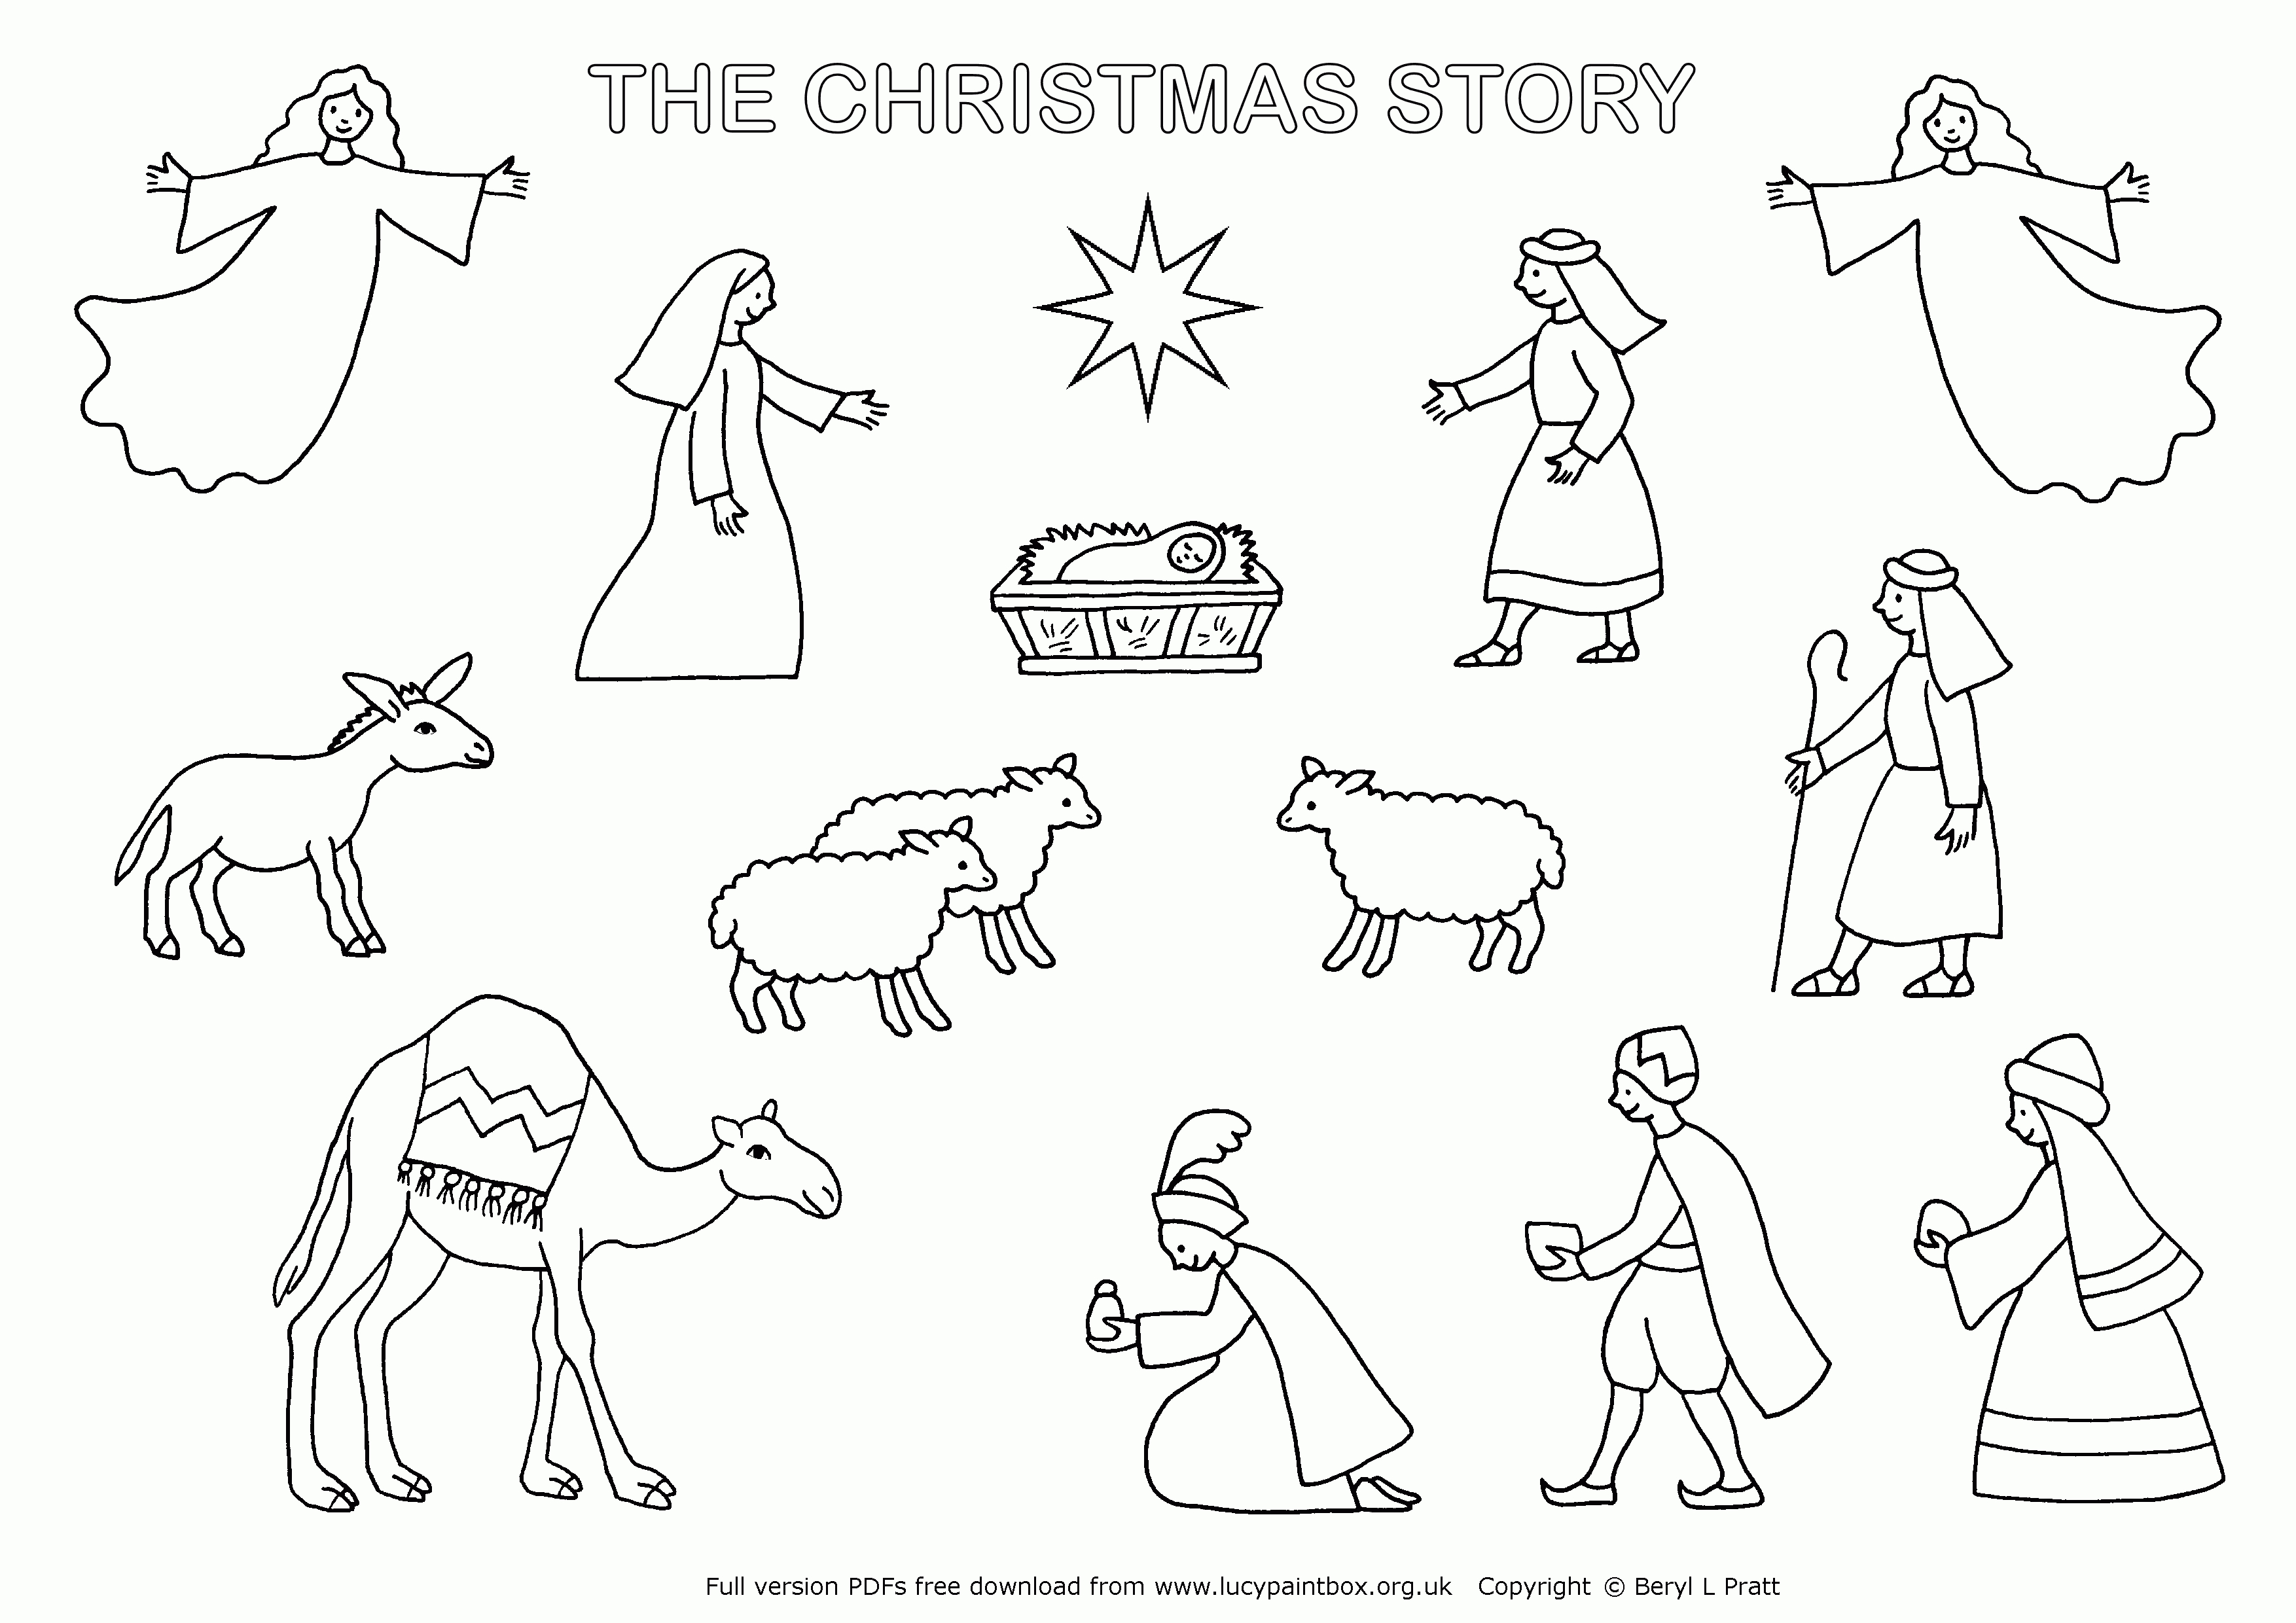 Lucypaintbox Org Uk Has A Lovely Nativity Scene That Also Stands Up - Free Printable Christmas Story Coloring Pages